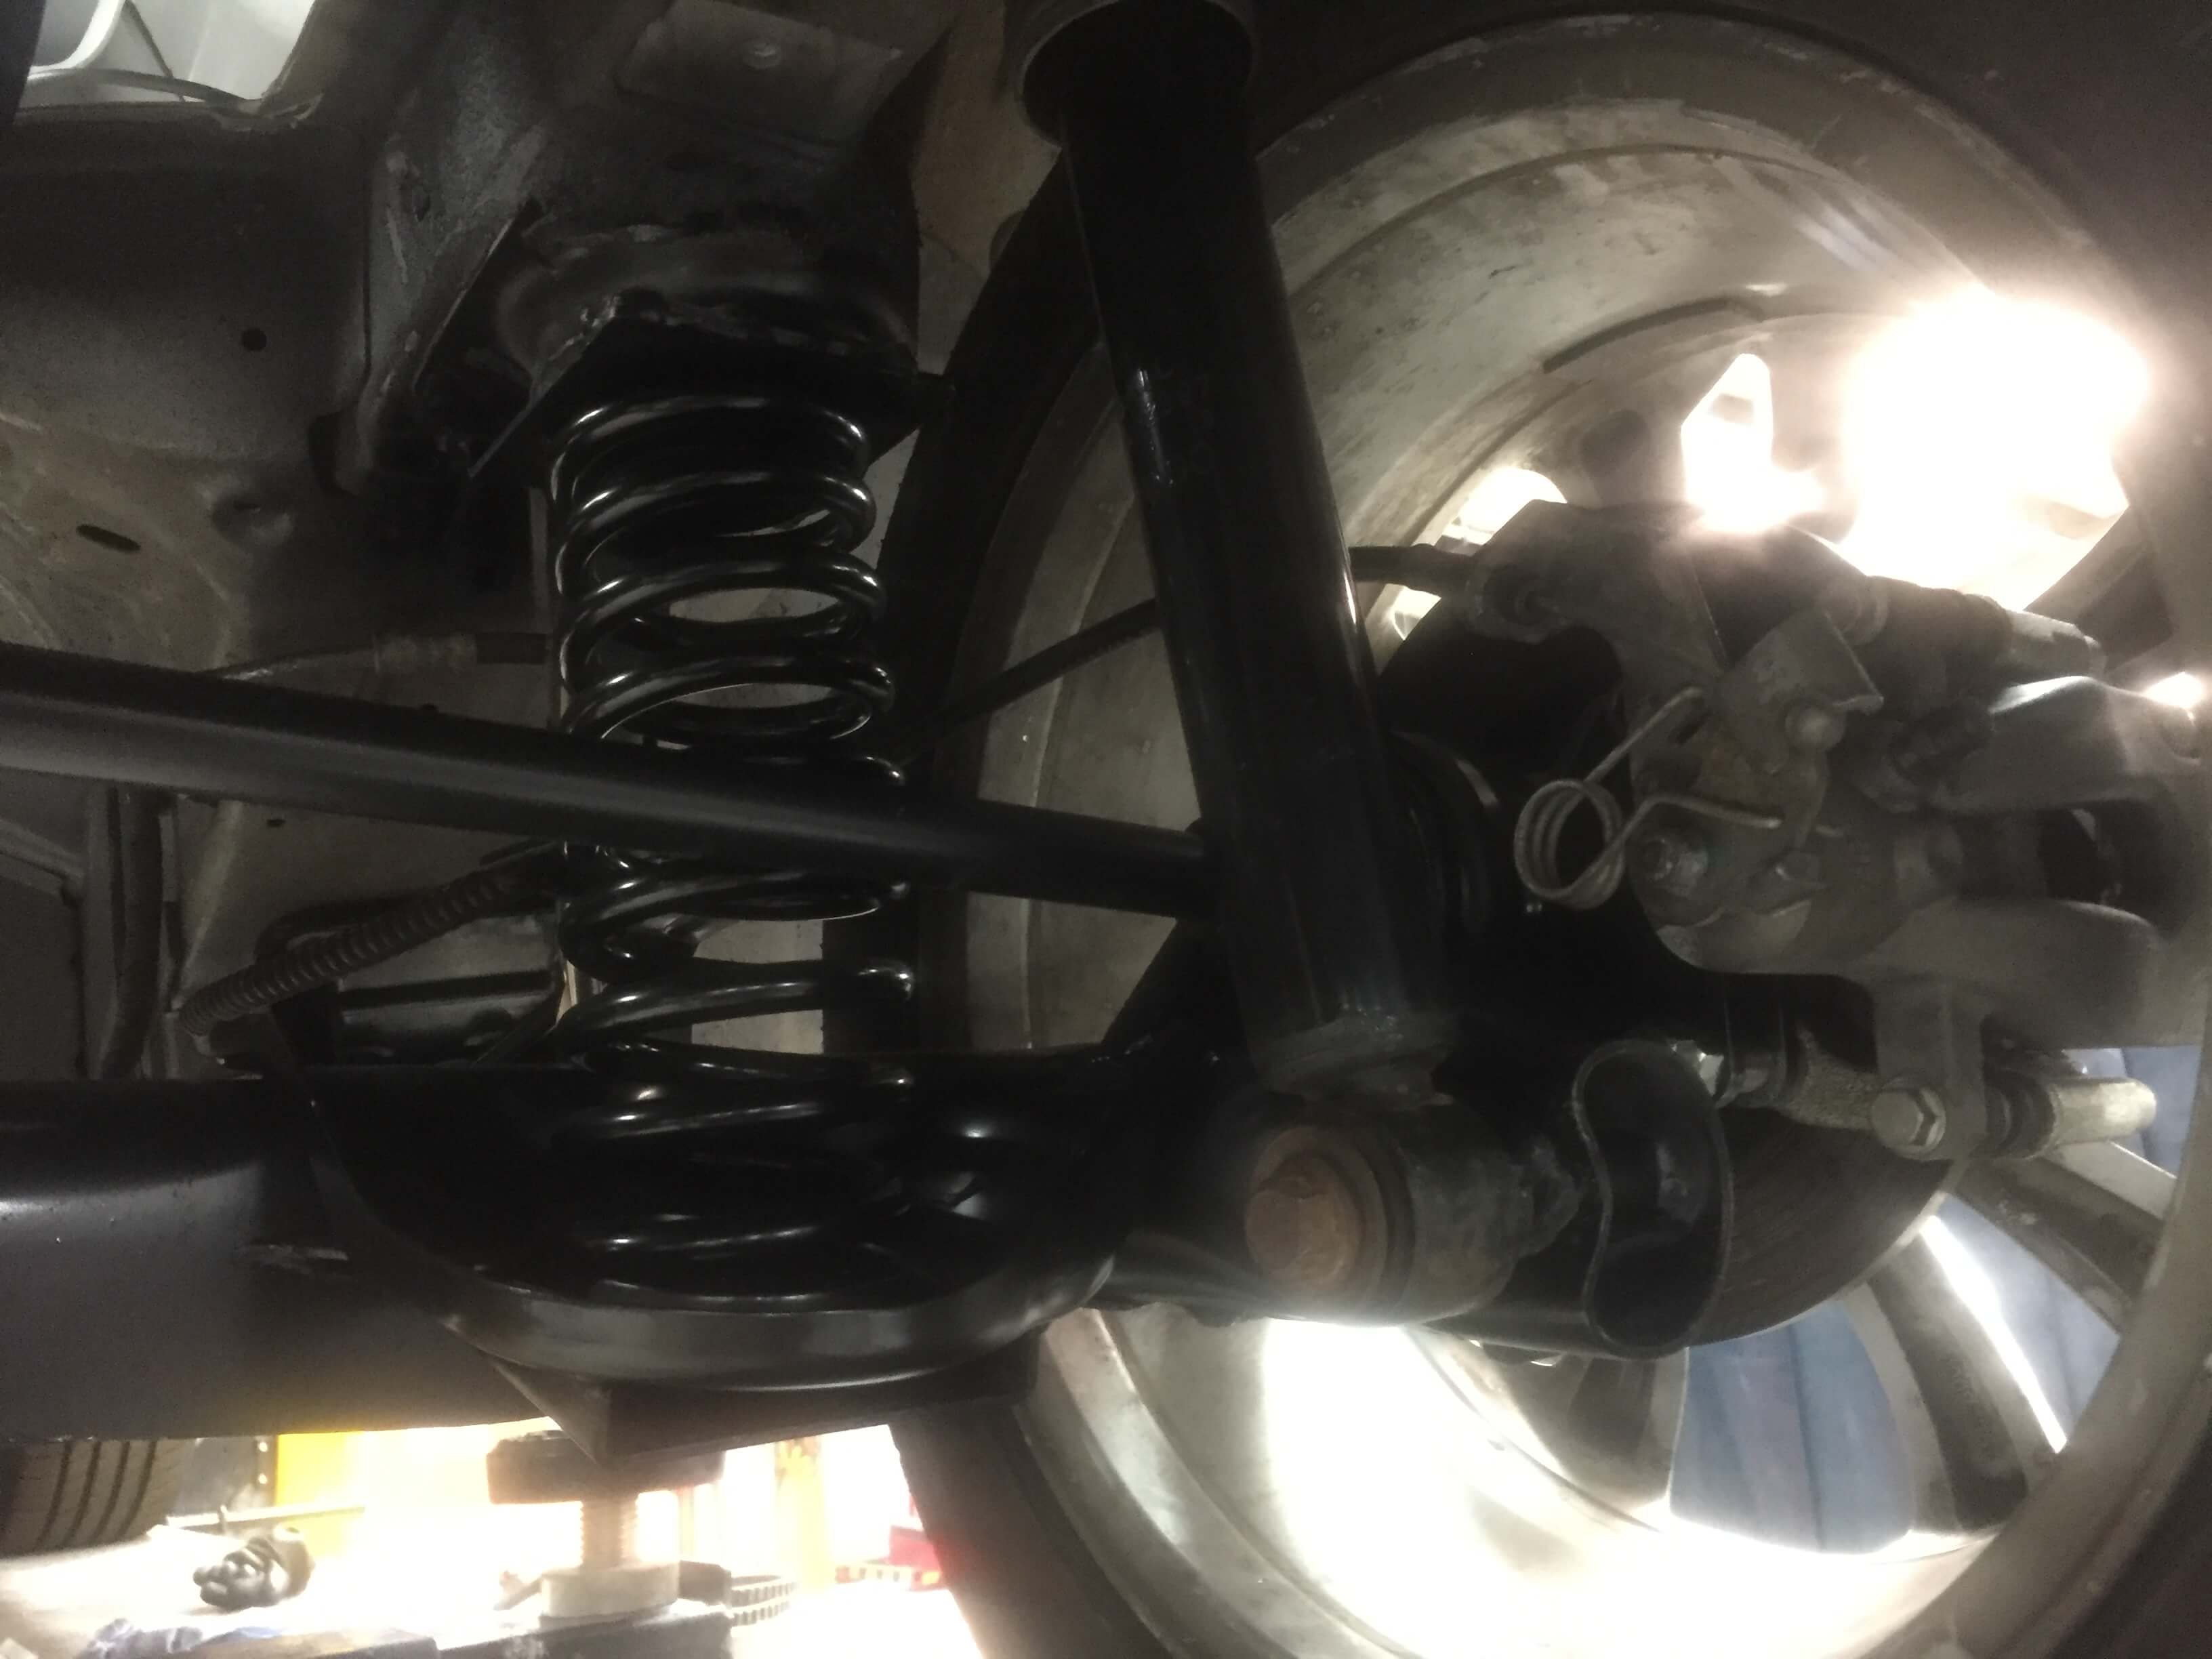 Bottom view of the rear suspension of a vehicle